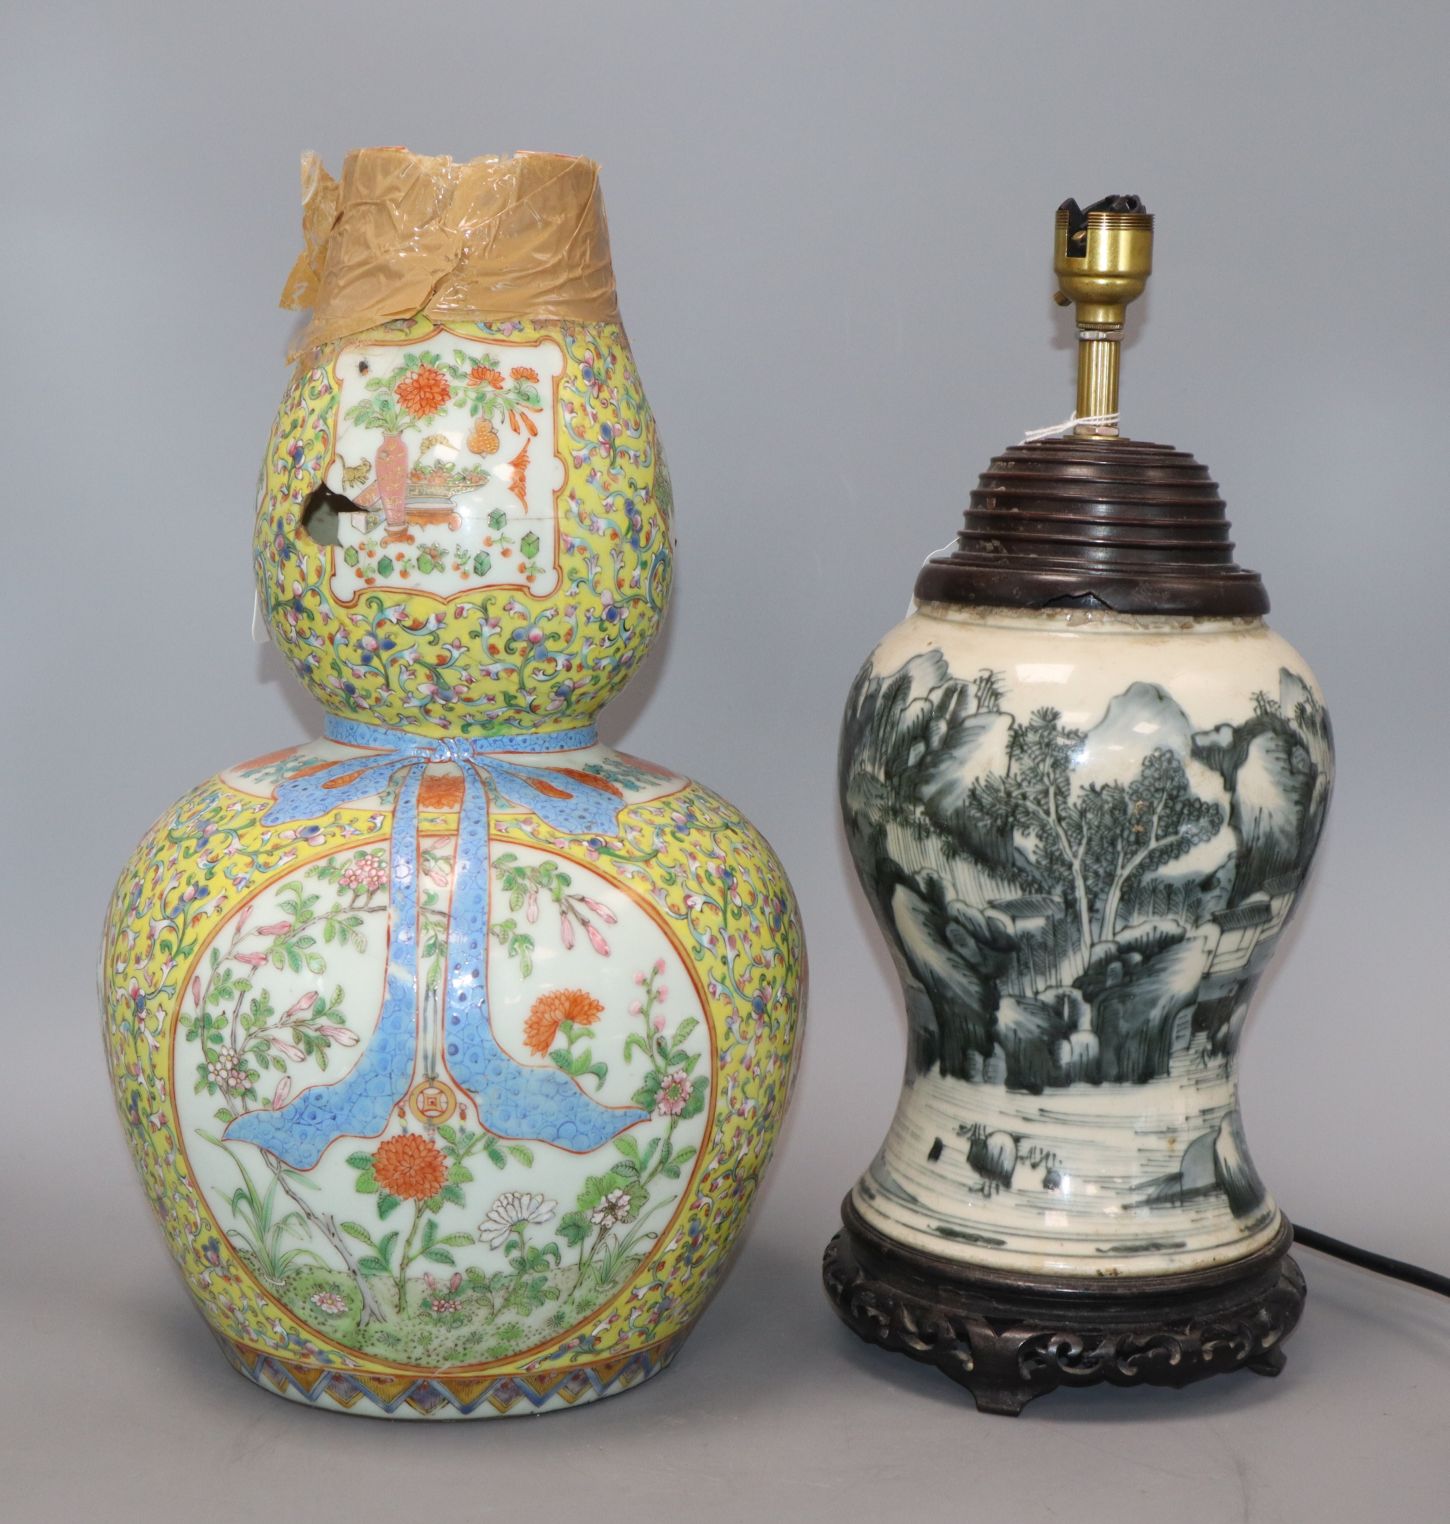 A Chinese Kangxi period blue and white vase, converted to a lamp and a 19th century Chinese